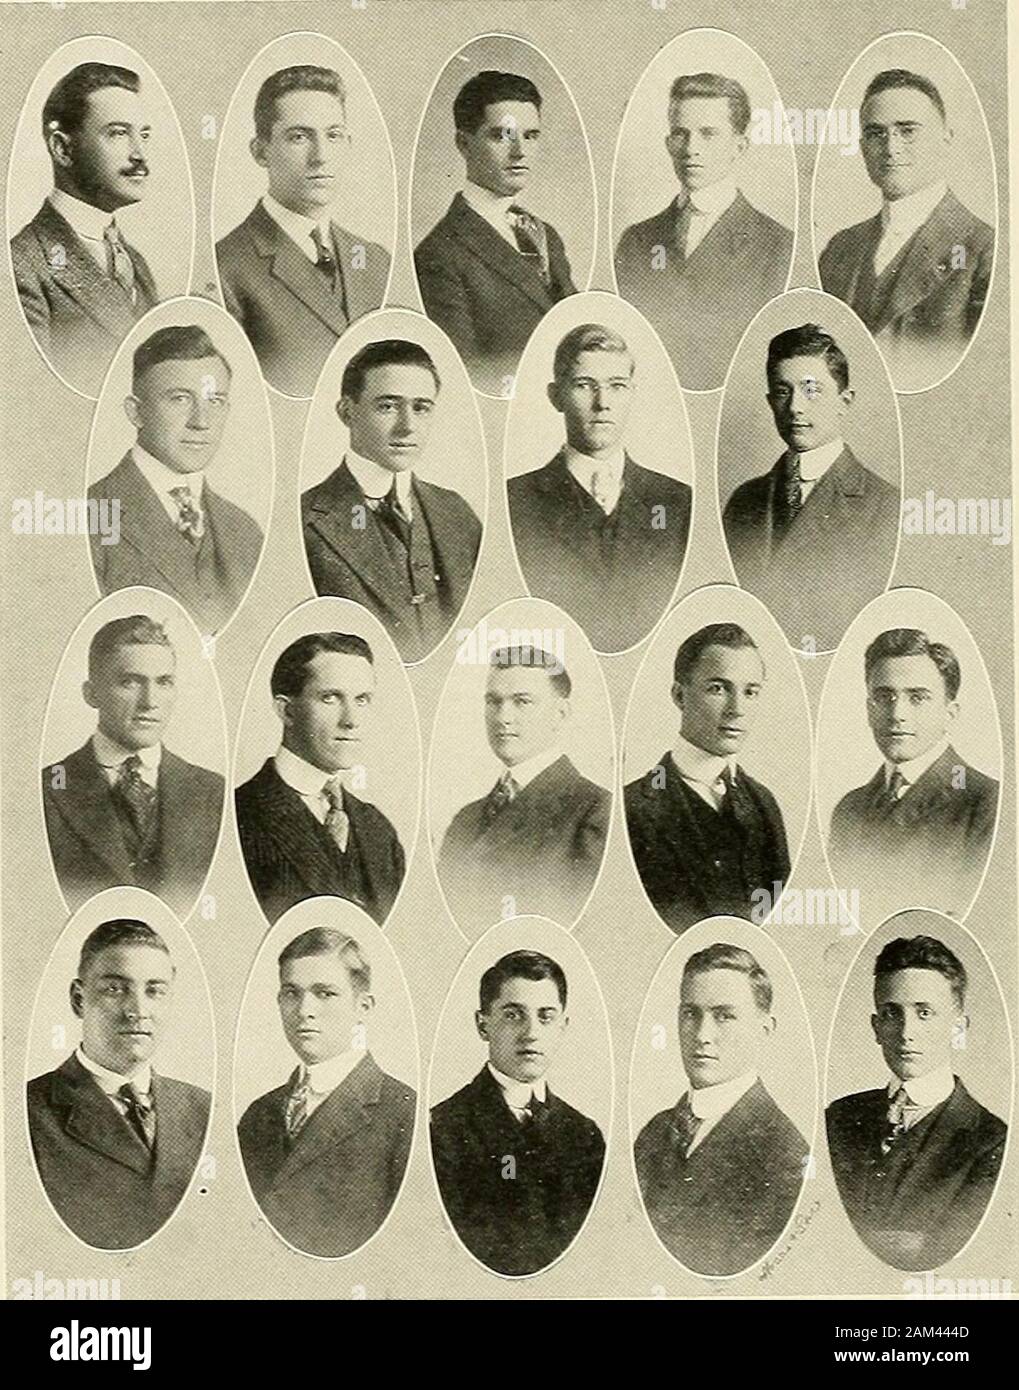 Jambalaya [yearbook] 1917 . (256) Delta Omicron Alpha Alpha Chapter of Delta Omicron Alpha Eslablished Tulaiie University 1904Colors: Gold and White Publicalion: Delta Omicron Alpha Quarterly Fratres in Urbe J. F. Dunn, M.D. P. F. Murphy. M.D. G. W. Fainre, M.D. RoBT. Strong, M.D. C. P. HoLDERiTH, M.D. L. B. Sarten, M.D. A. Henriques, M.D. W. O. Williams. M.D. R. B. HARRtsoN, M.D. L. M. Thomoson, M.D. H. S. Storrinc, M.D. R. A. Oriole P. L. QUERENS, M.D. H. C. LOCHTE. M.D. S. A. Maxwell, M.D.L. A. Hebert. M.D. L. Lopez, M. D.S. H. Baker, M.D. Geo. HauserC. A. QutNA, M.D.L. Weiss, M.D. Fratres Stock Photo